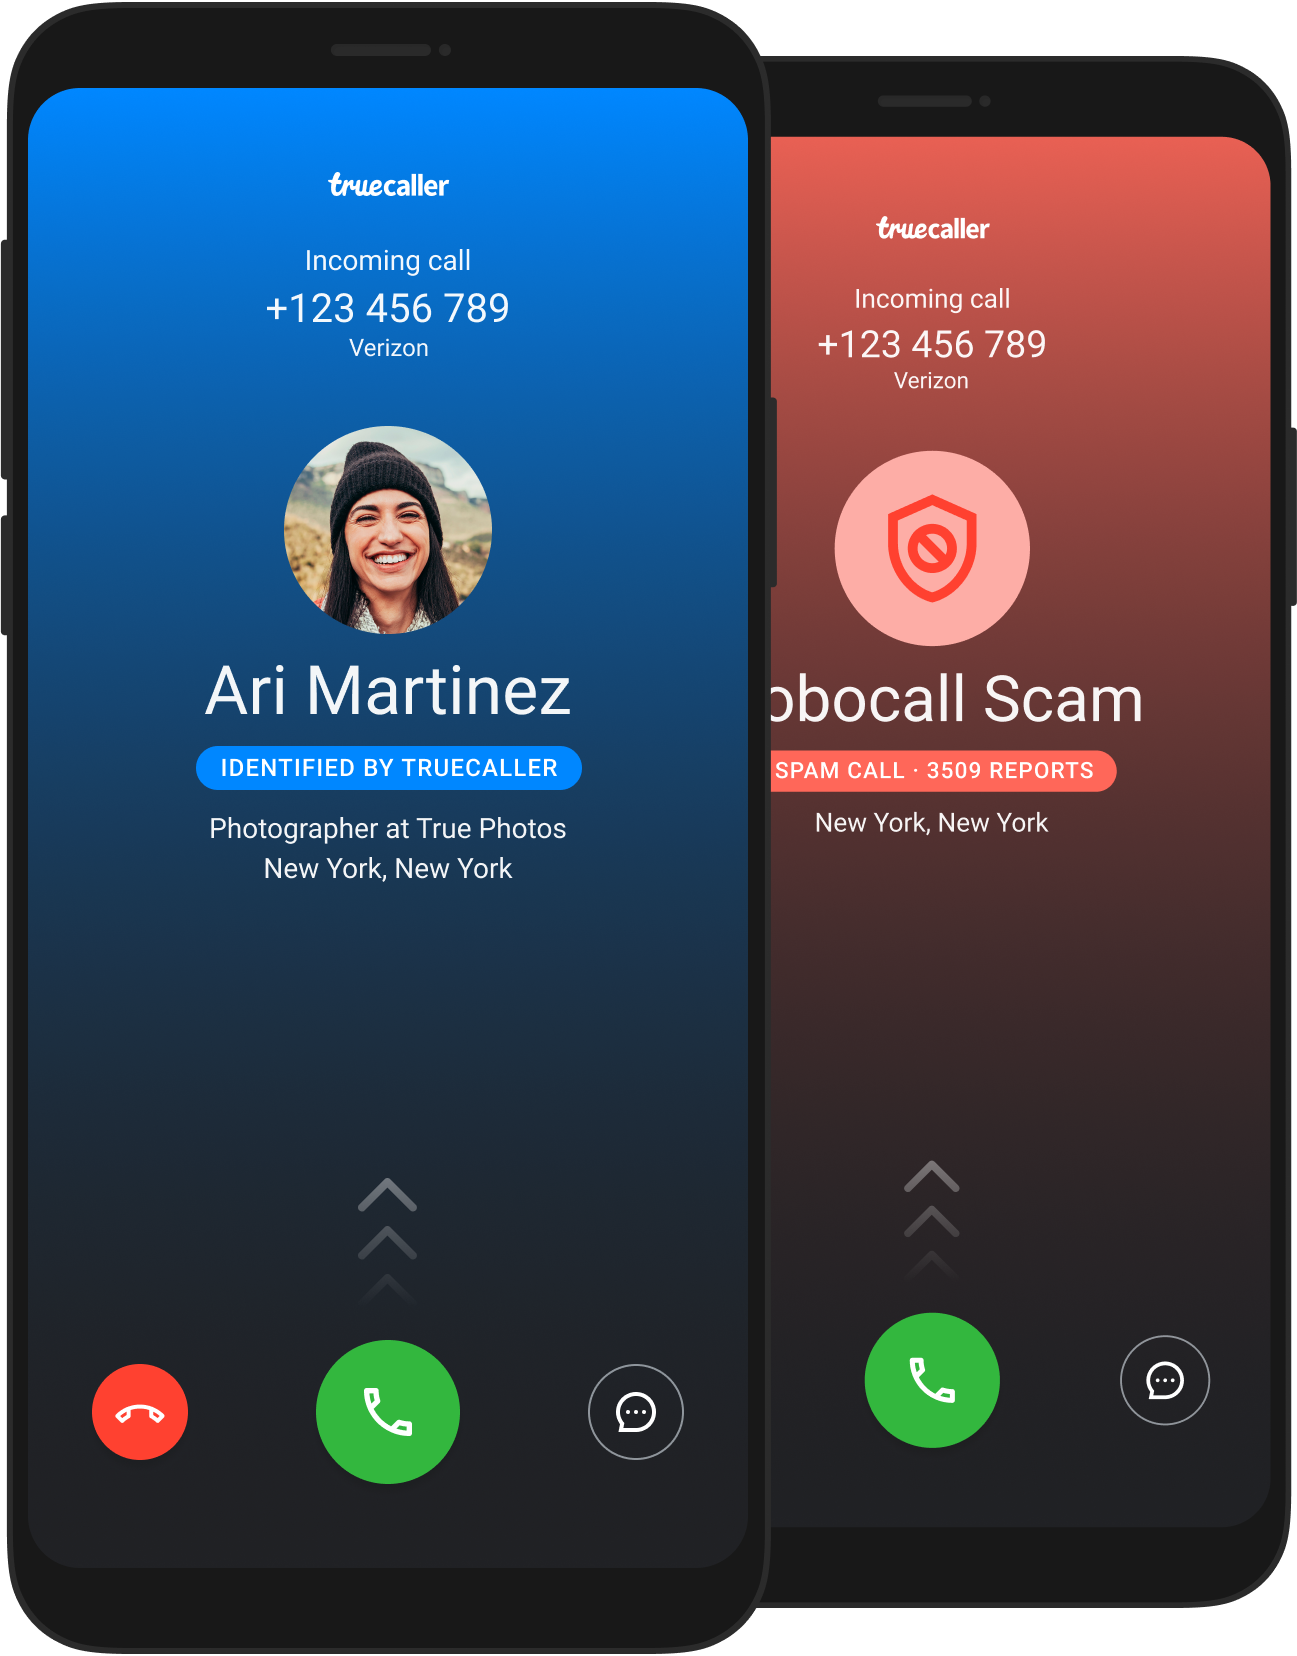 two phones showing identified incoming calls - one is a robocall scam and one is a person named "Ari Martinez"